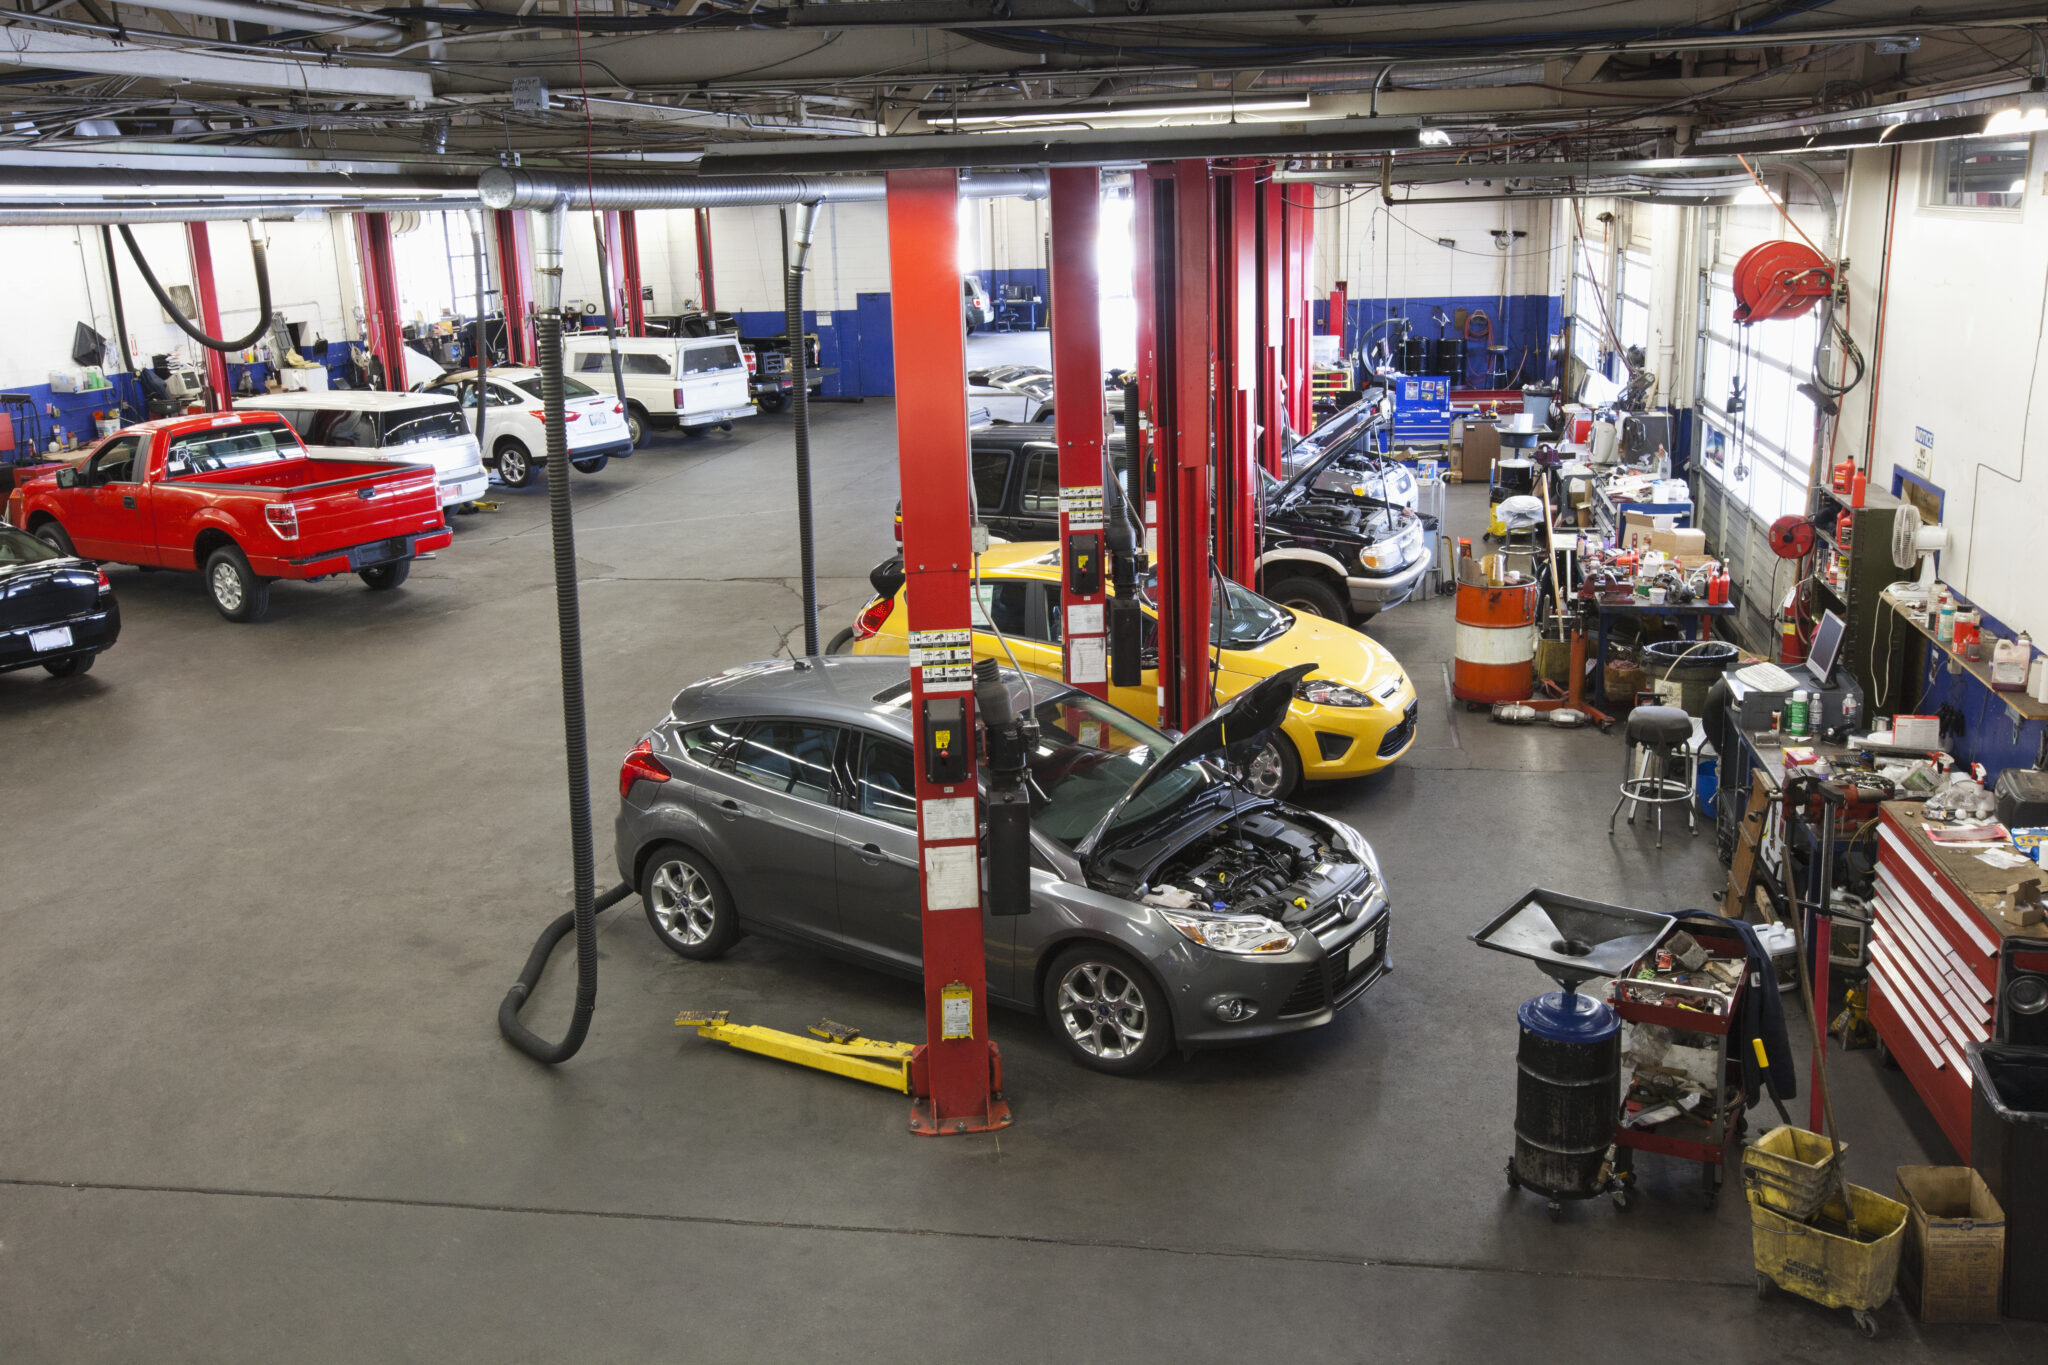 Auto Repair Shops: Watch Out for These Red Flags